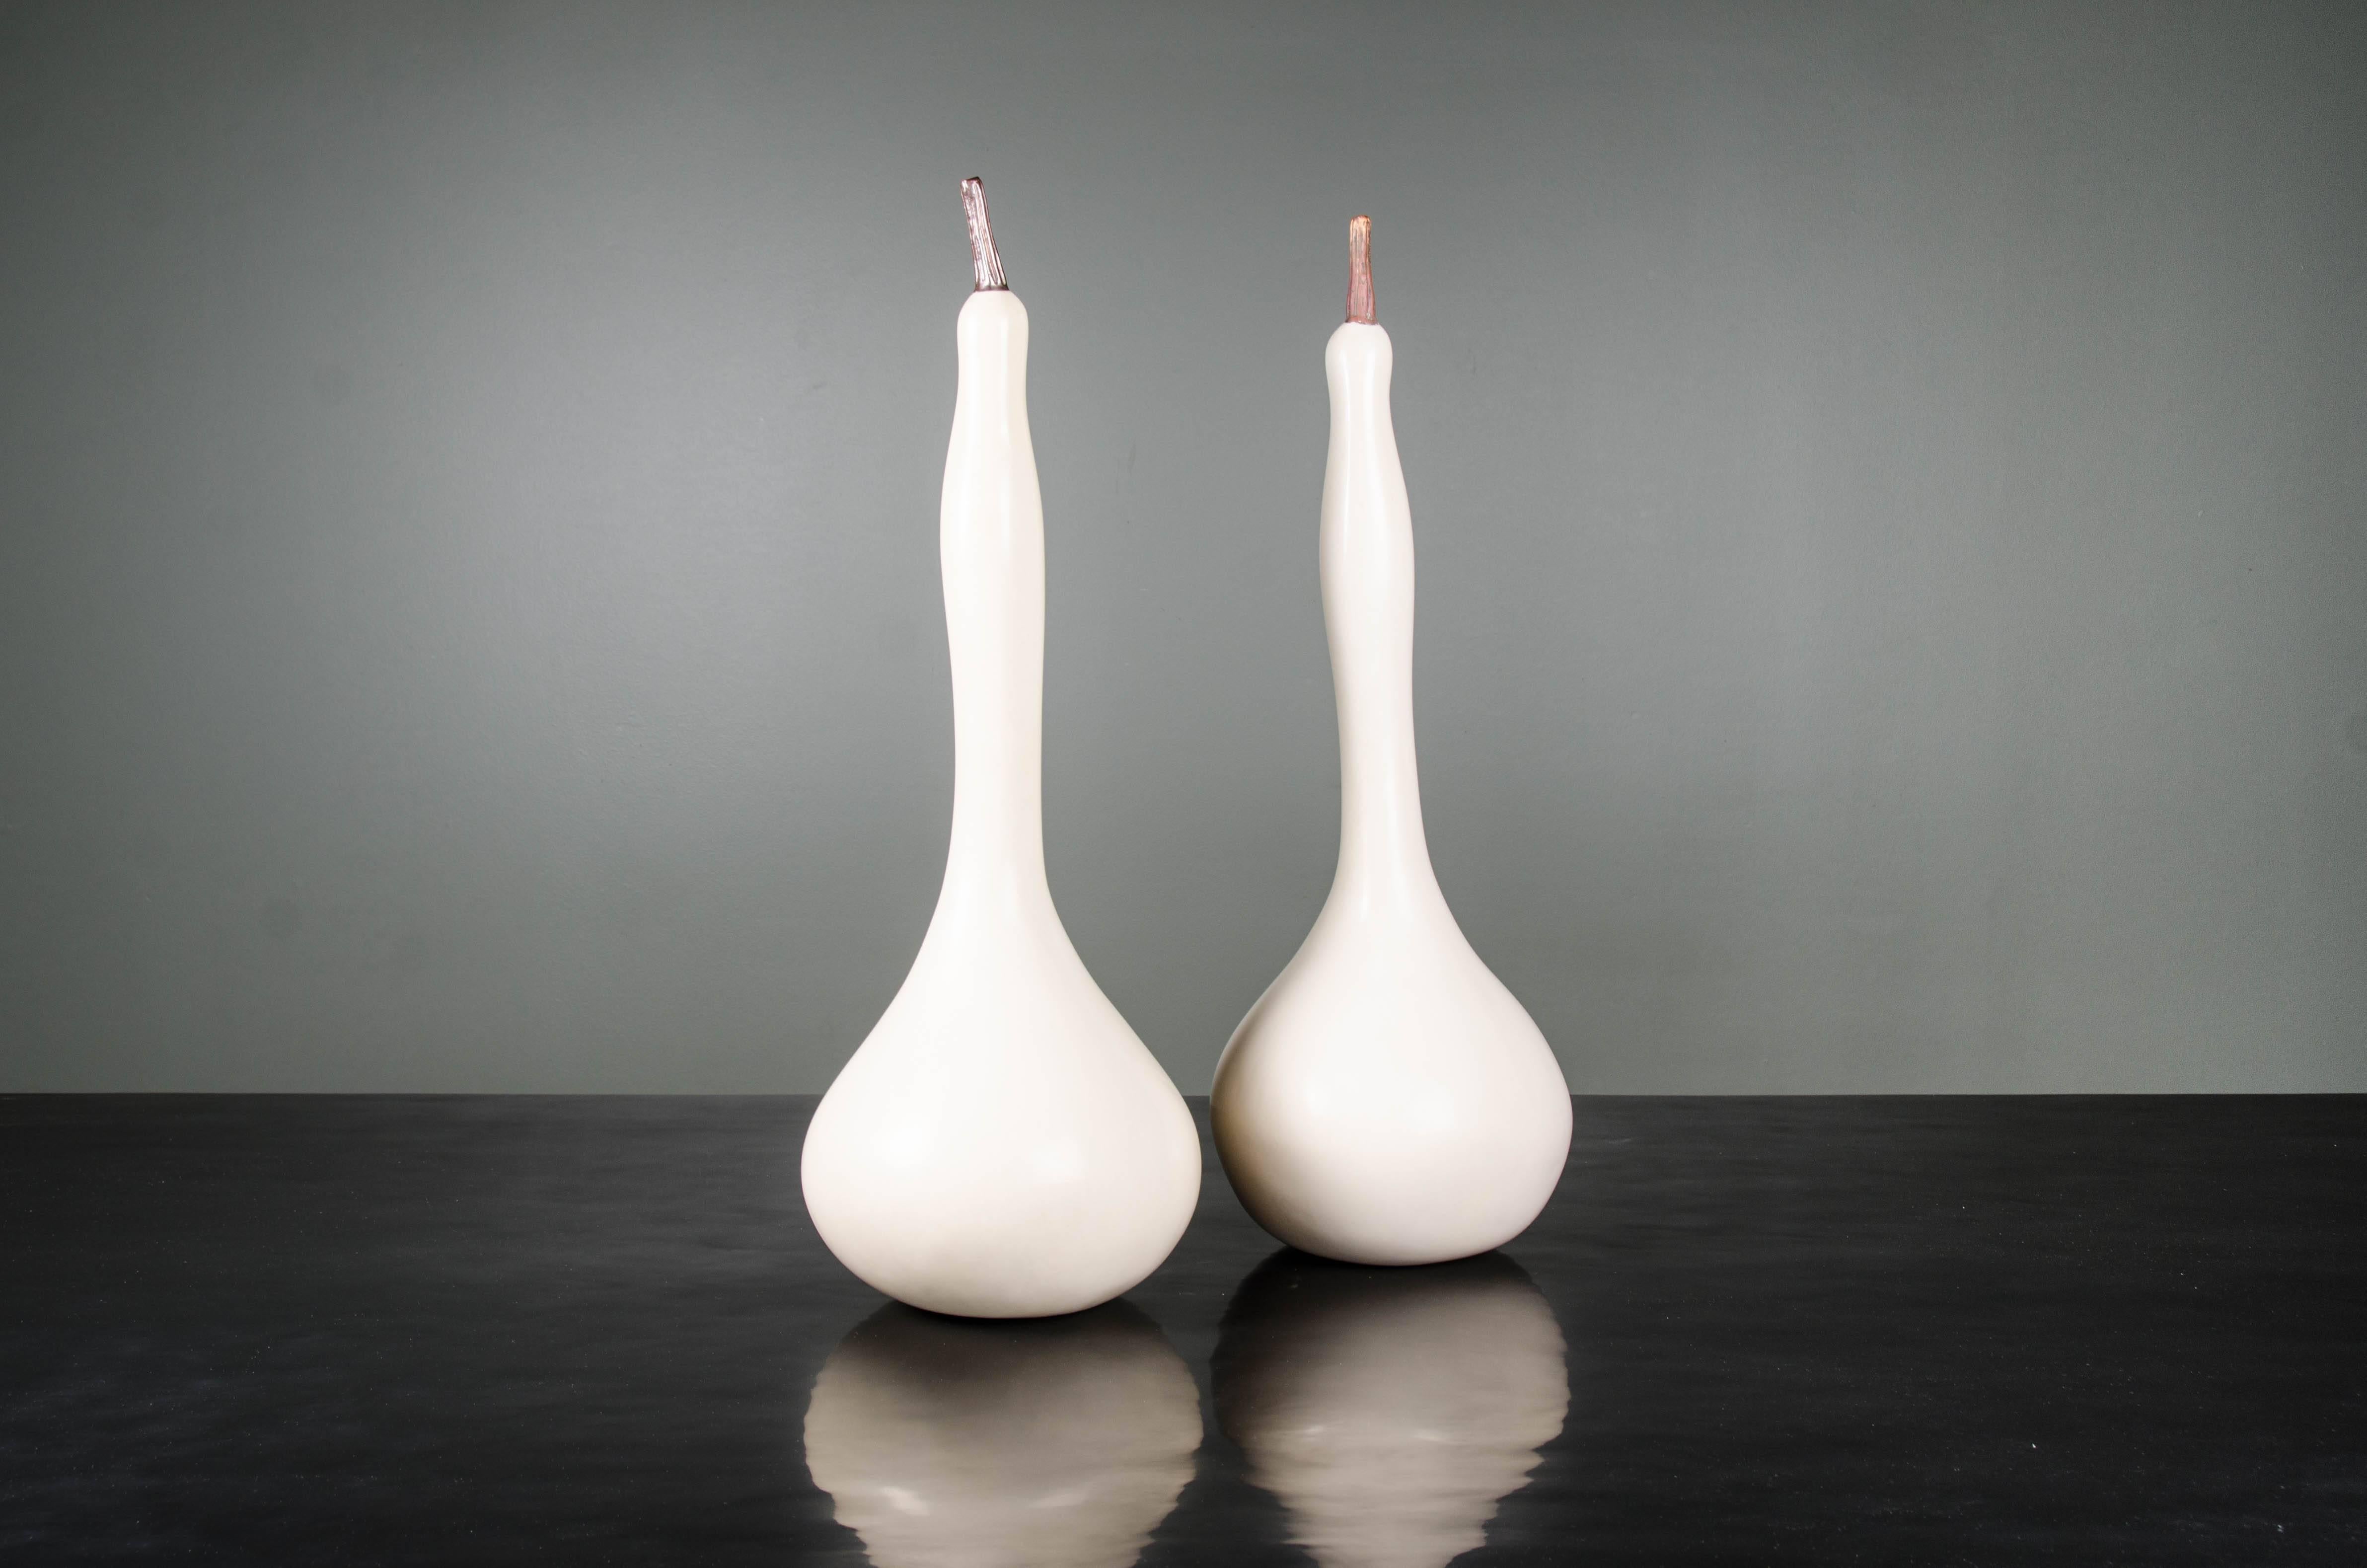 Repoussé Standing Gourd Sculpture, Cream Lacquer by Robert Kuo, Limited Edition For Sale